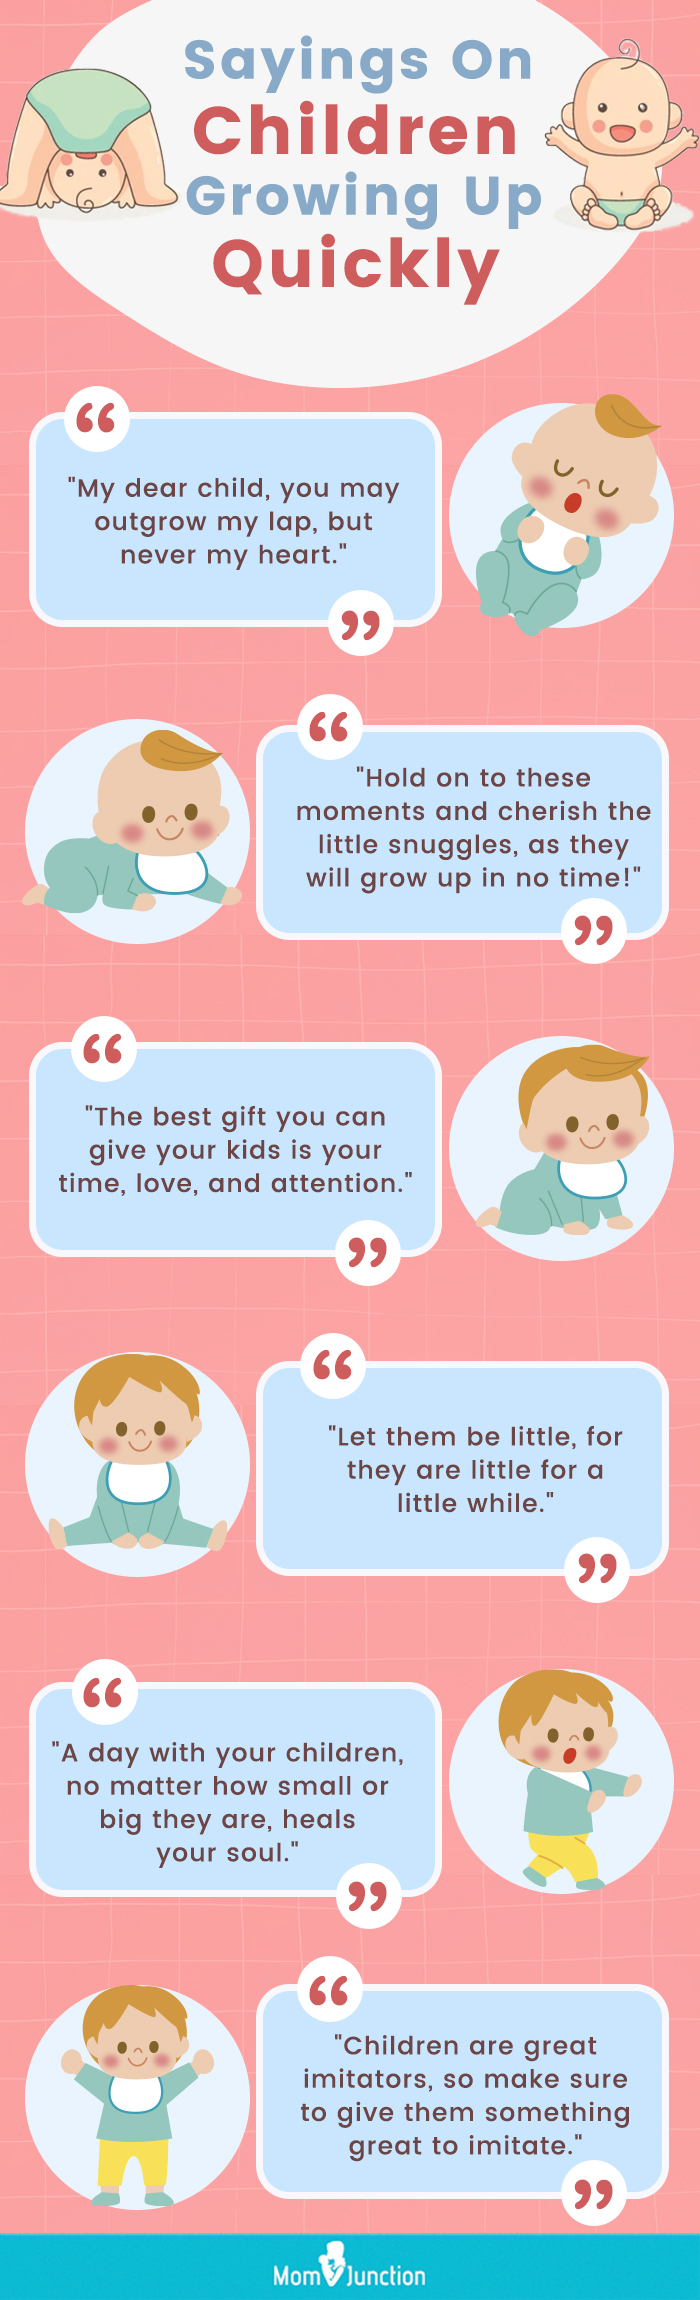 sayings on children growing up quickly (infographic)